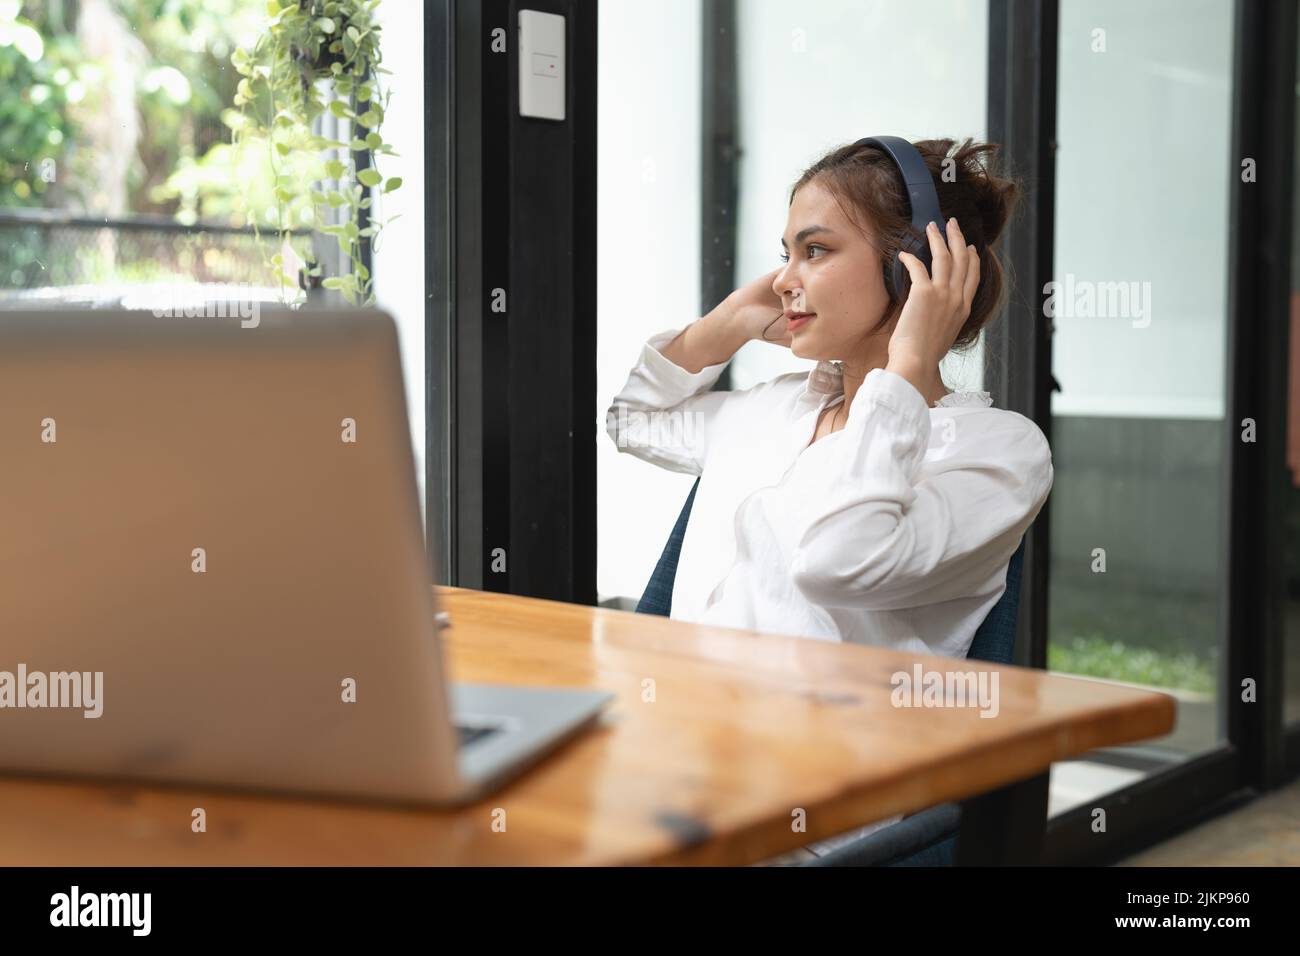 Online education, e-learning. young woman studying remotely, using a laptop, listening to online webinar at home Stock Photo